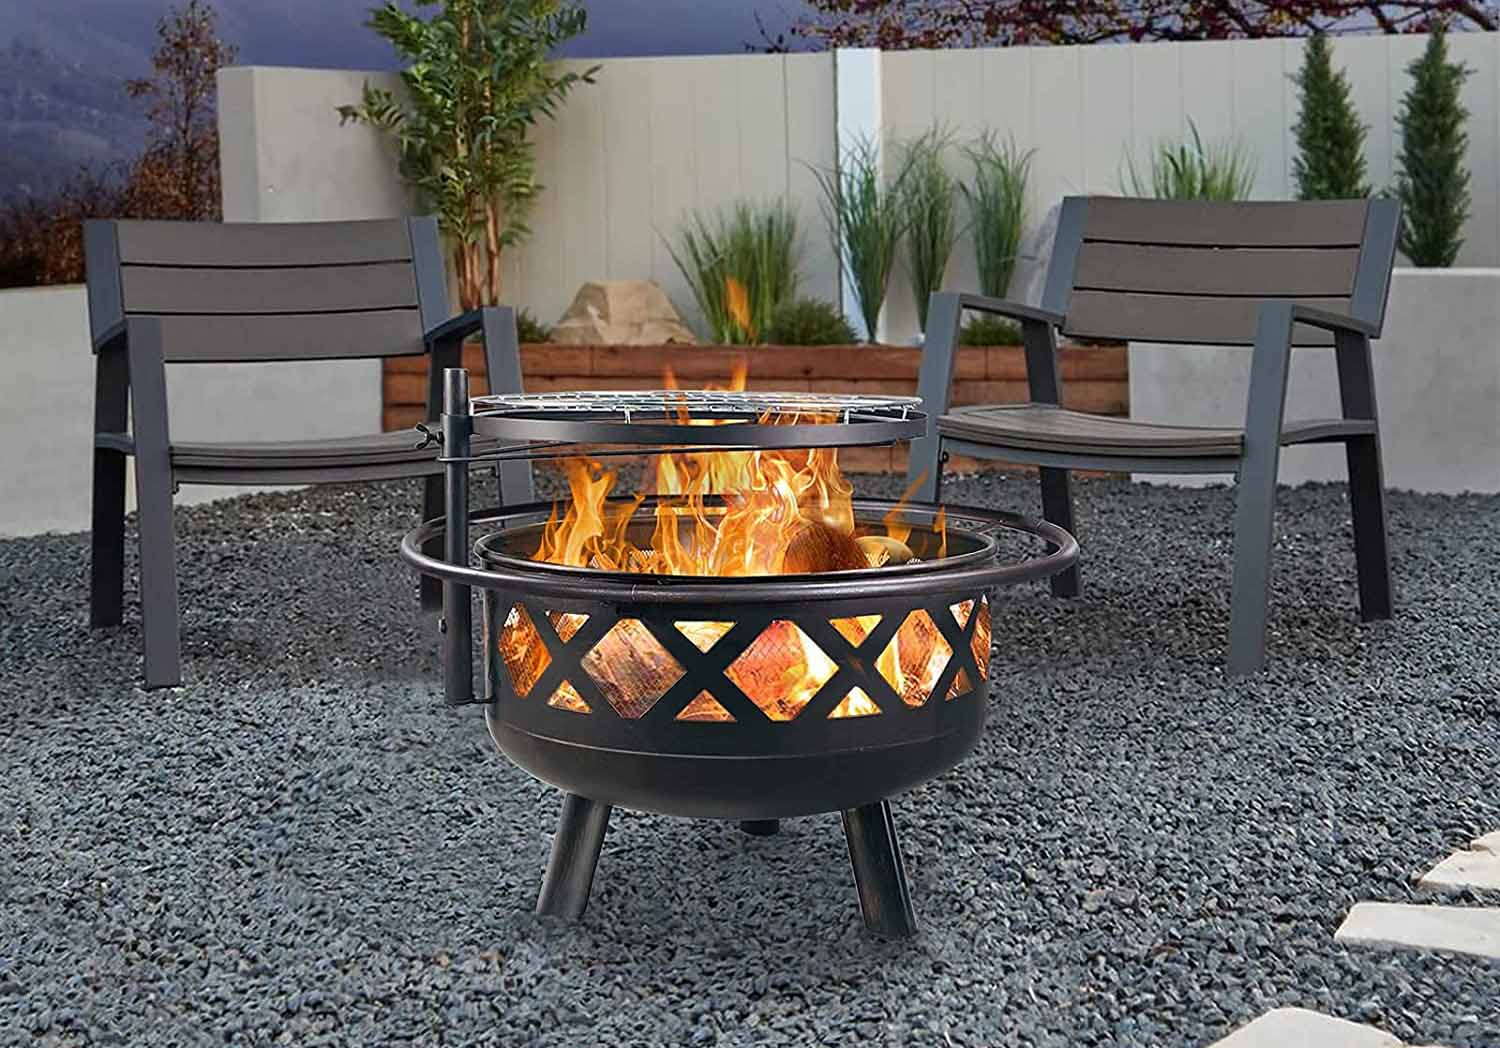 Top 10 Best Fire Pit Grill in 2022